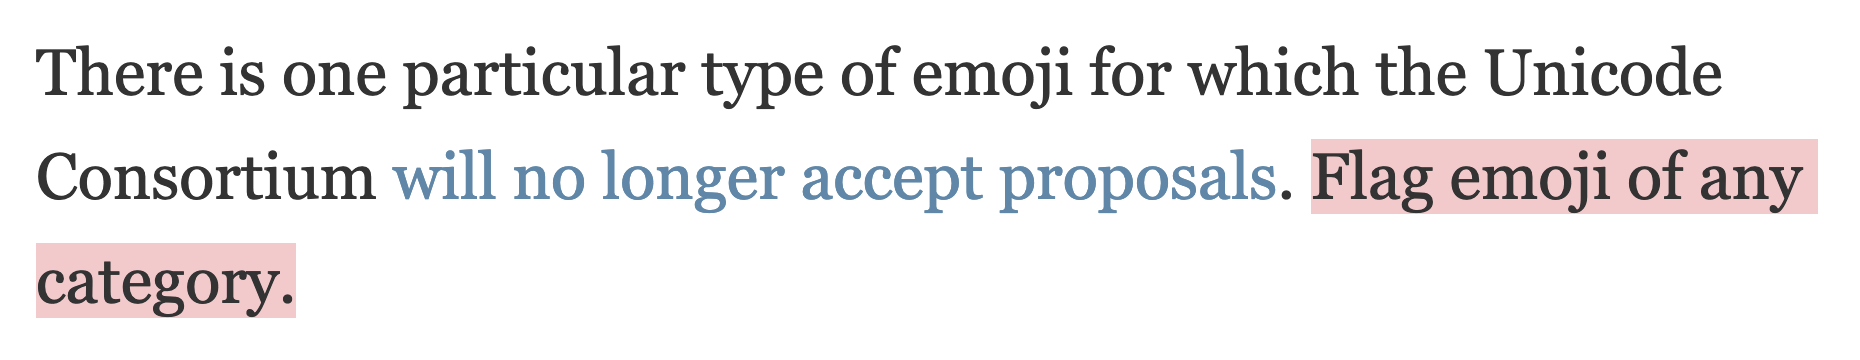 There is one particular type of emoji for which the Unicode Consortium will no longer accept proposals. Flag emoji of any category.